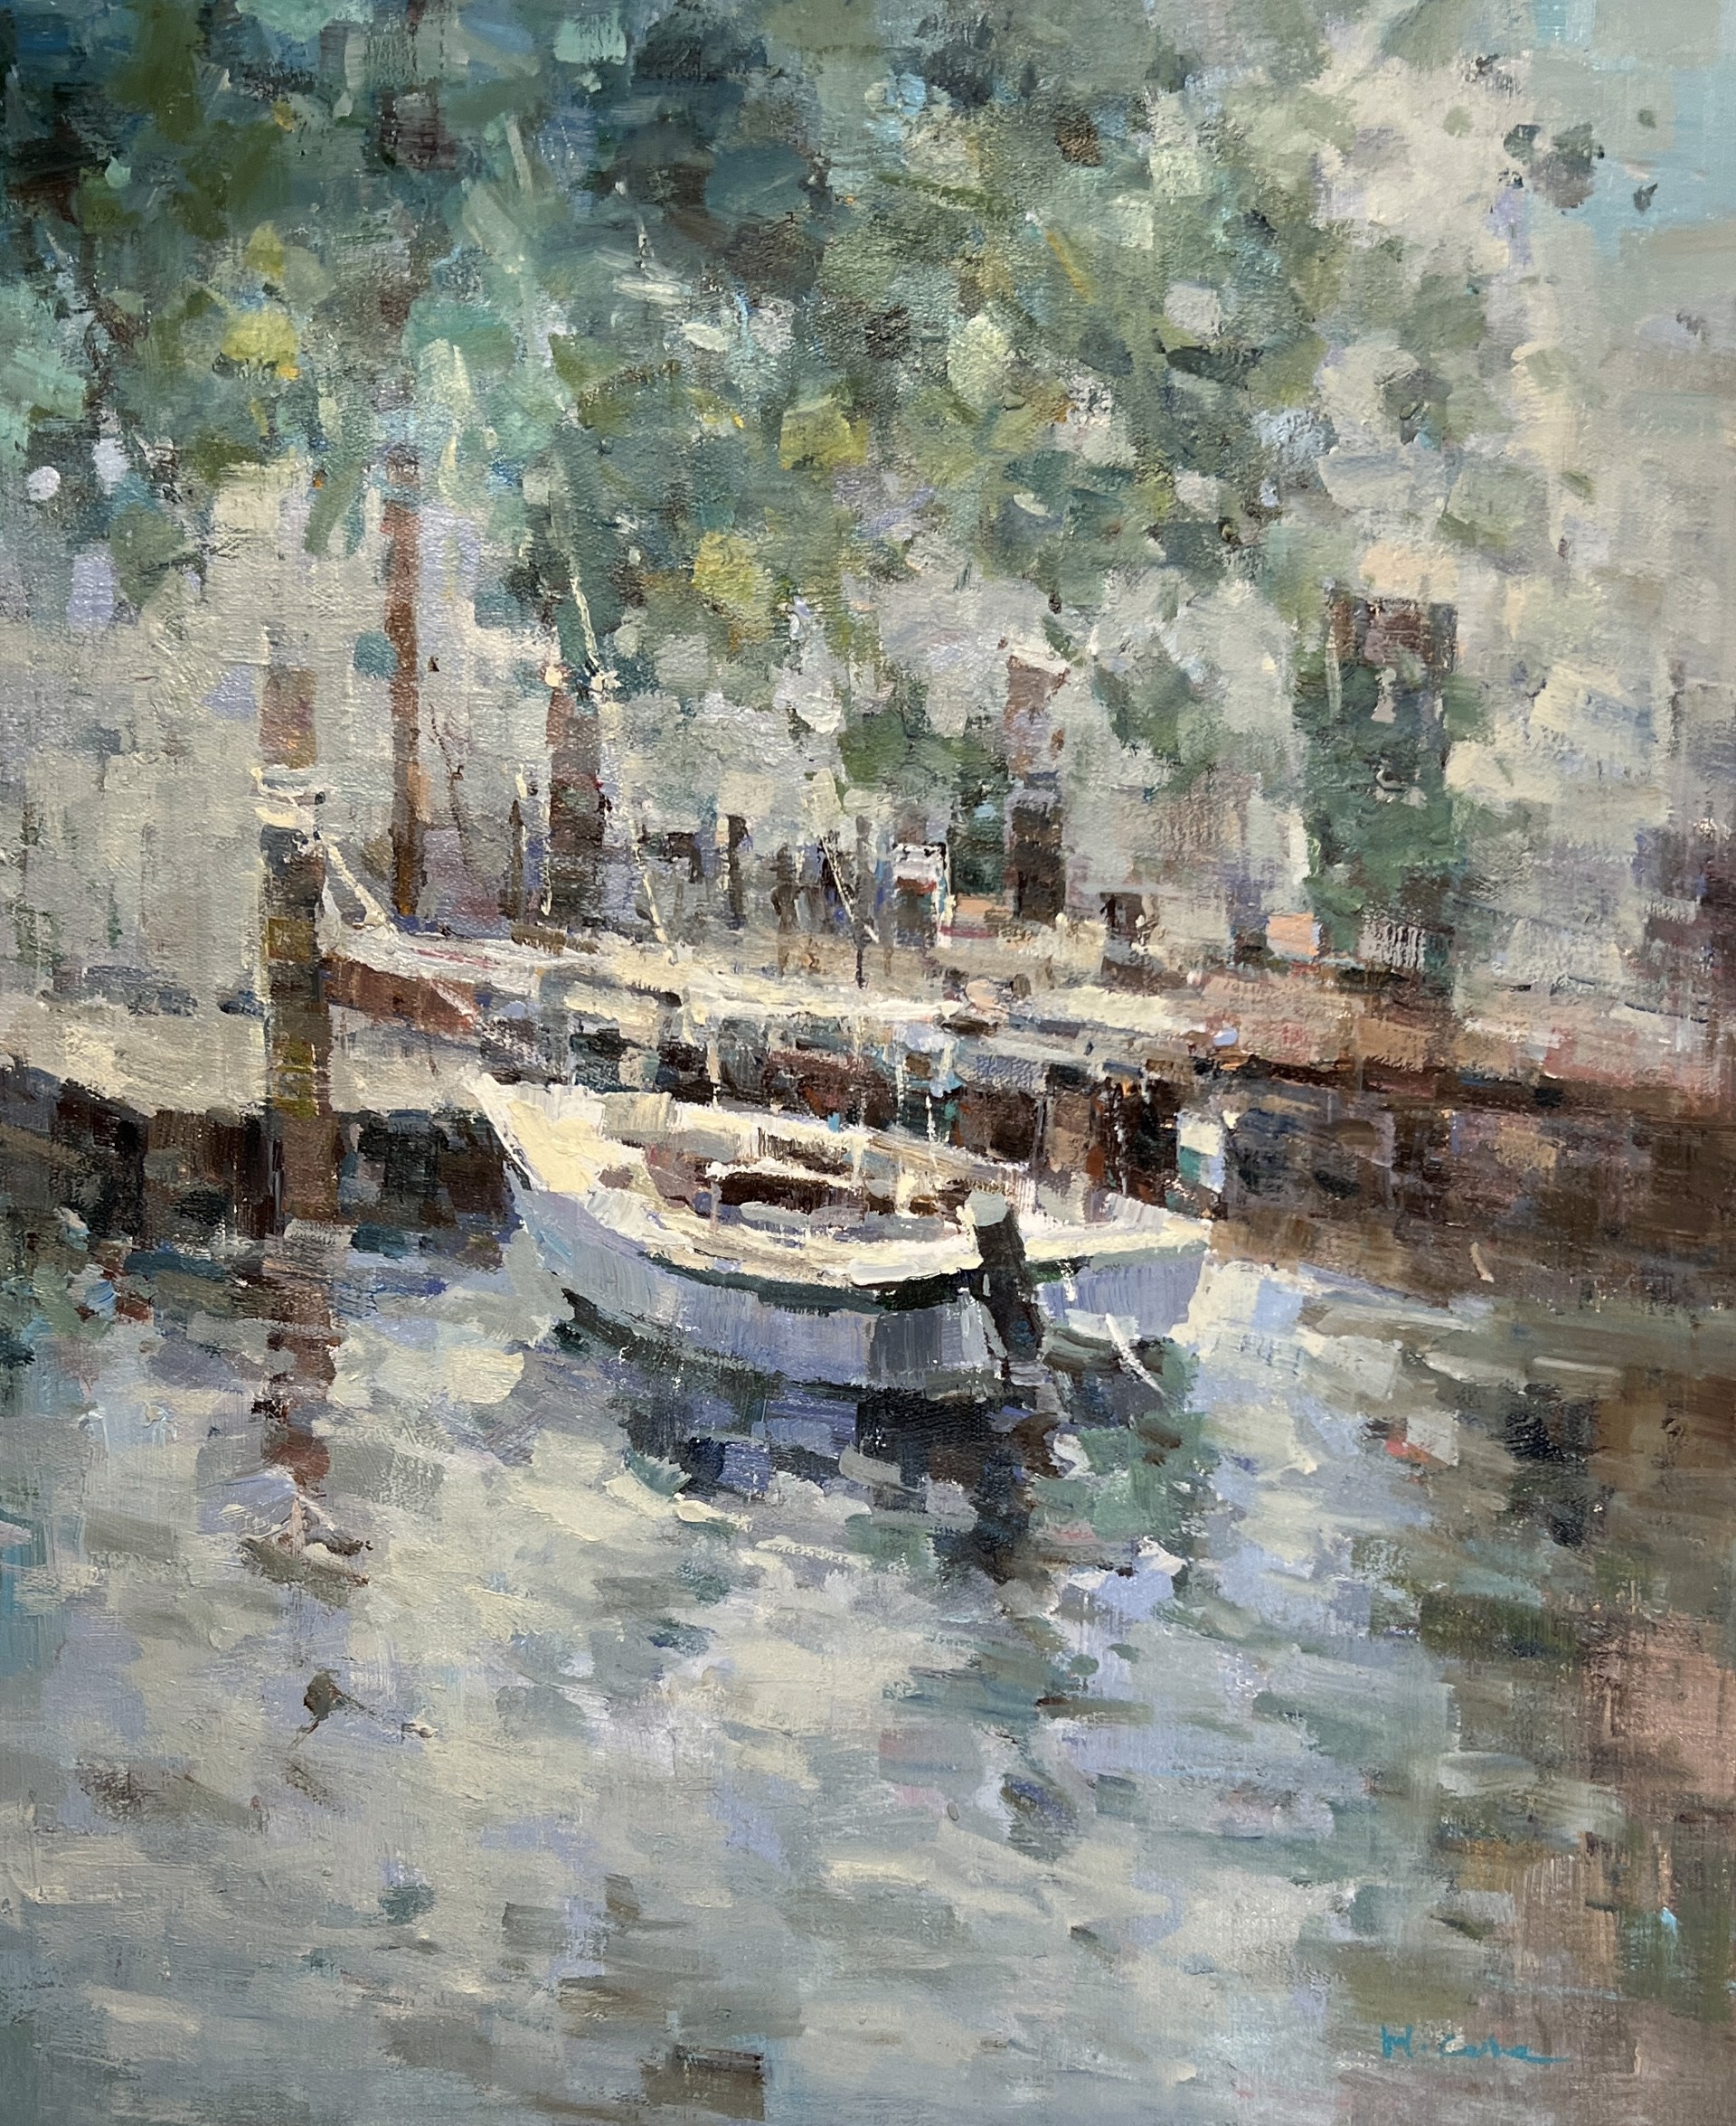 BOAT AT DOCK by H COLE